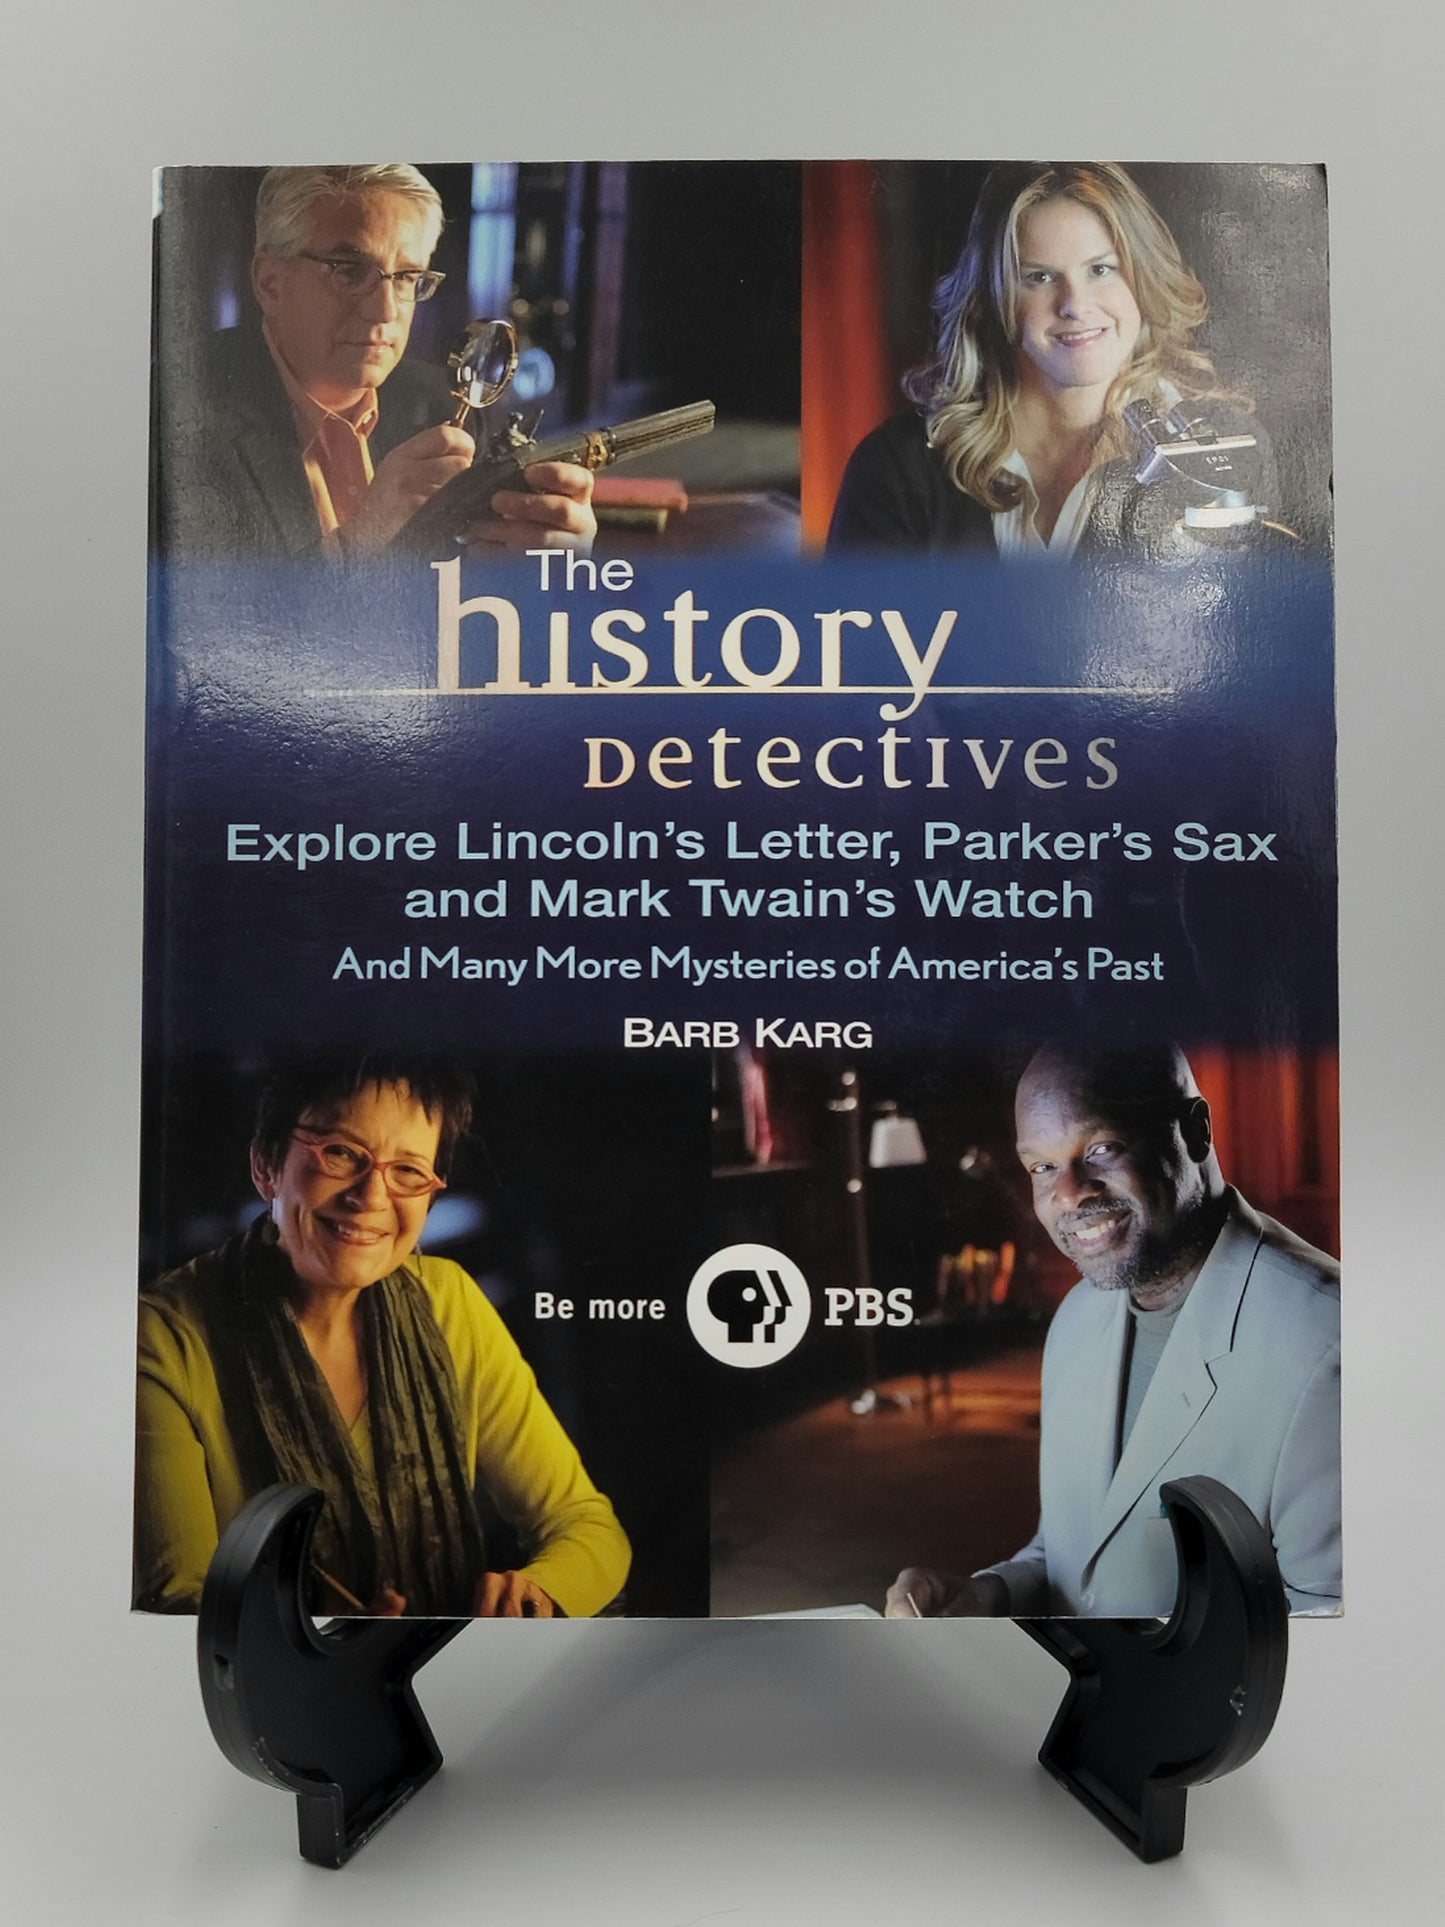 The History Detectives Explore Lincoln's Letter, Parker's Sax, and Mark Twain's Watch: And Many More Mysteries of America's Past by Barb Karg